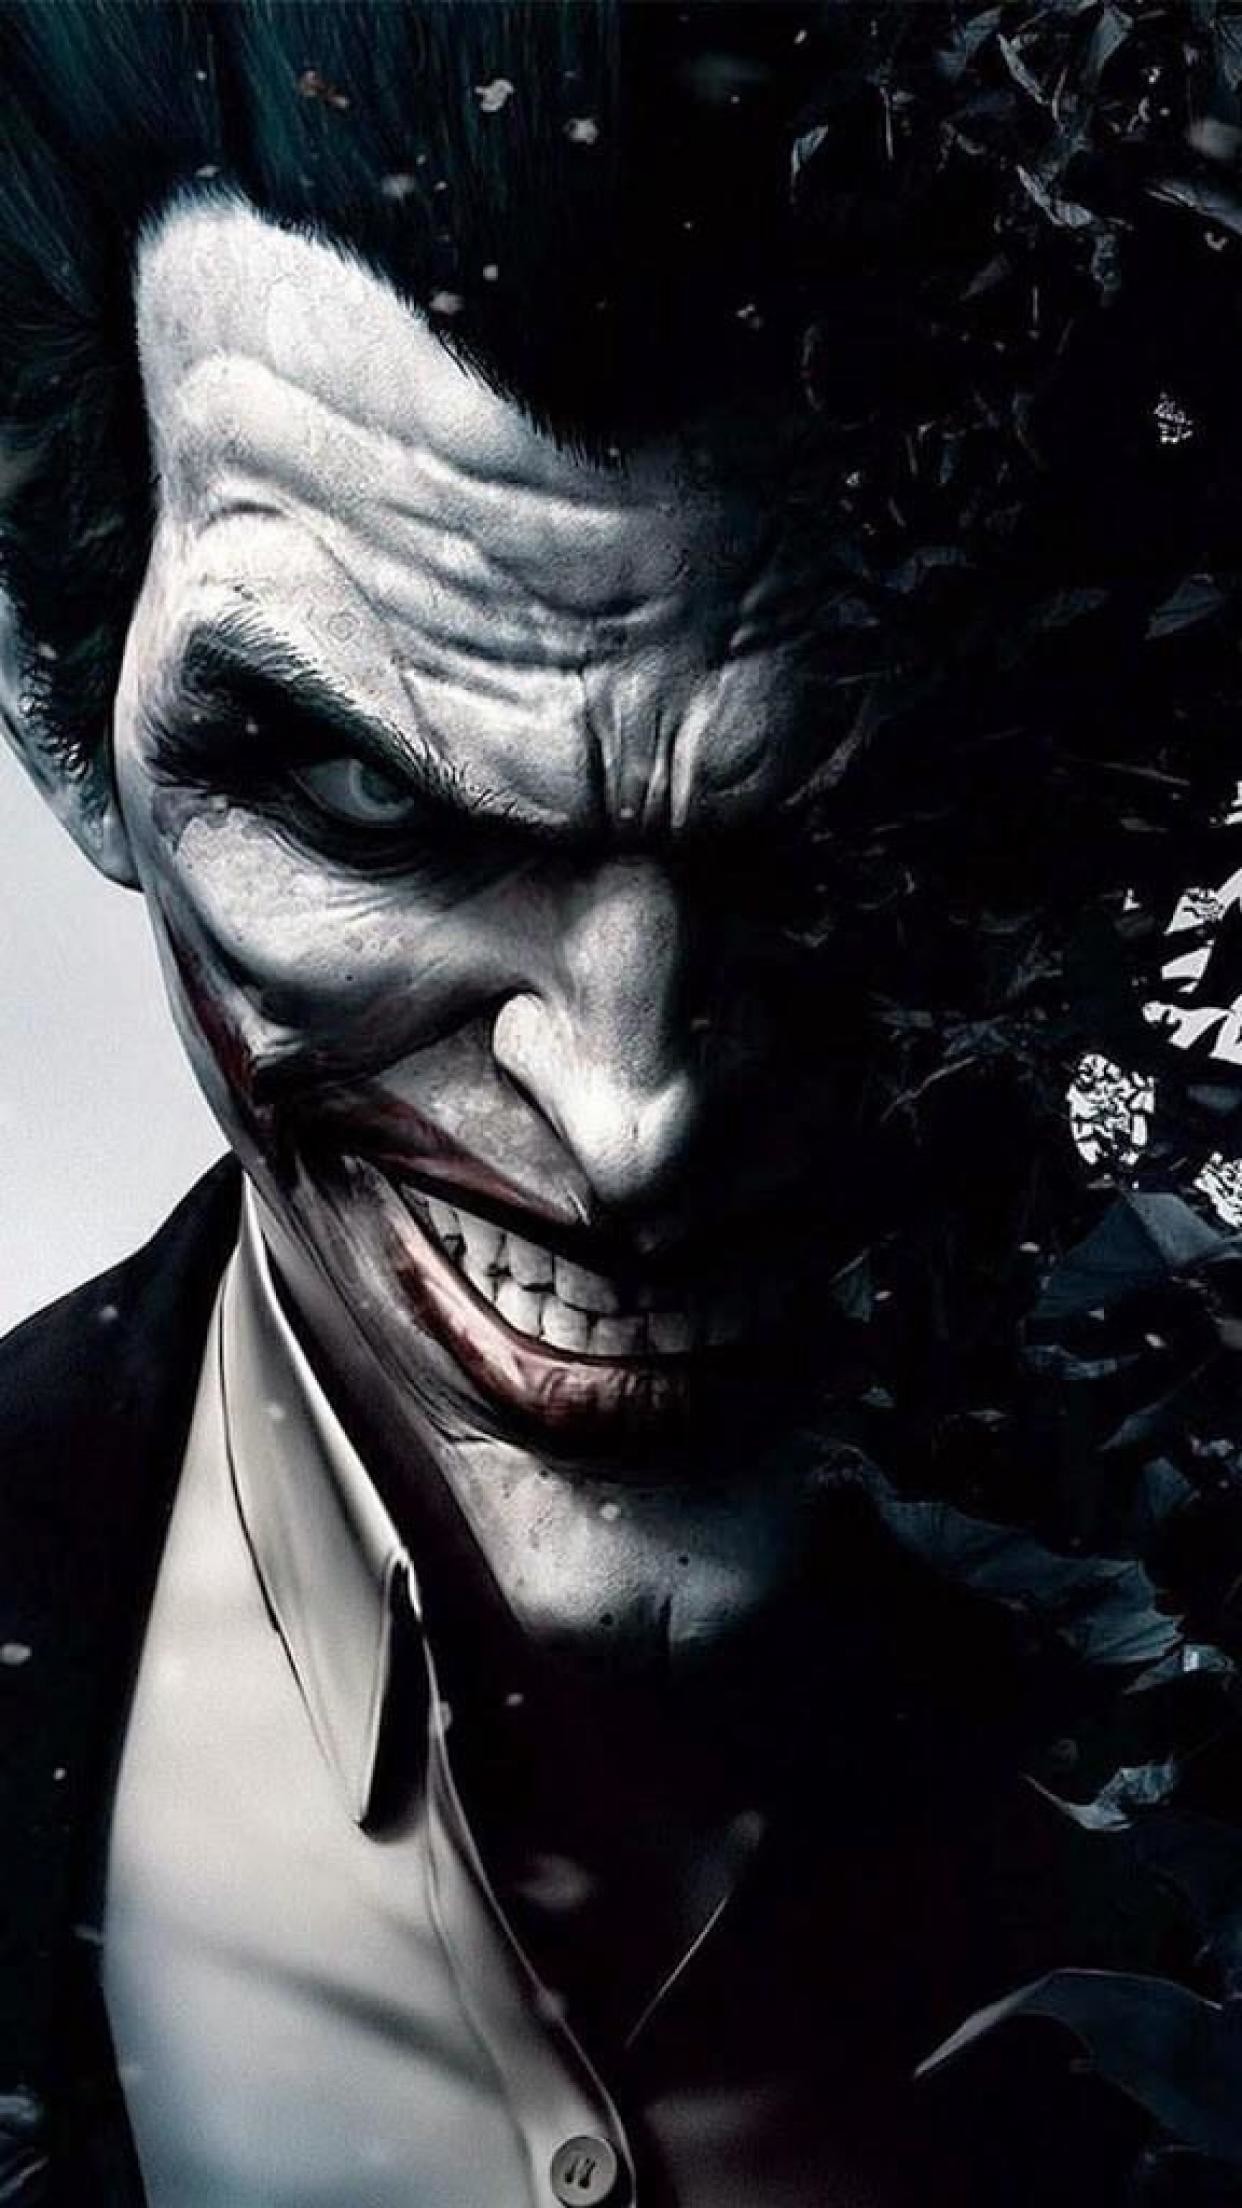 Wallpaper Hd Download For Android Mobile Joker